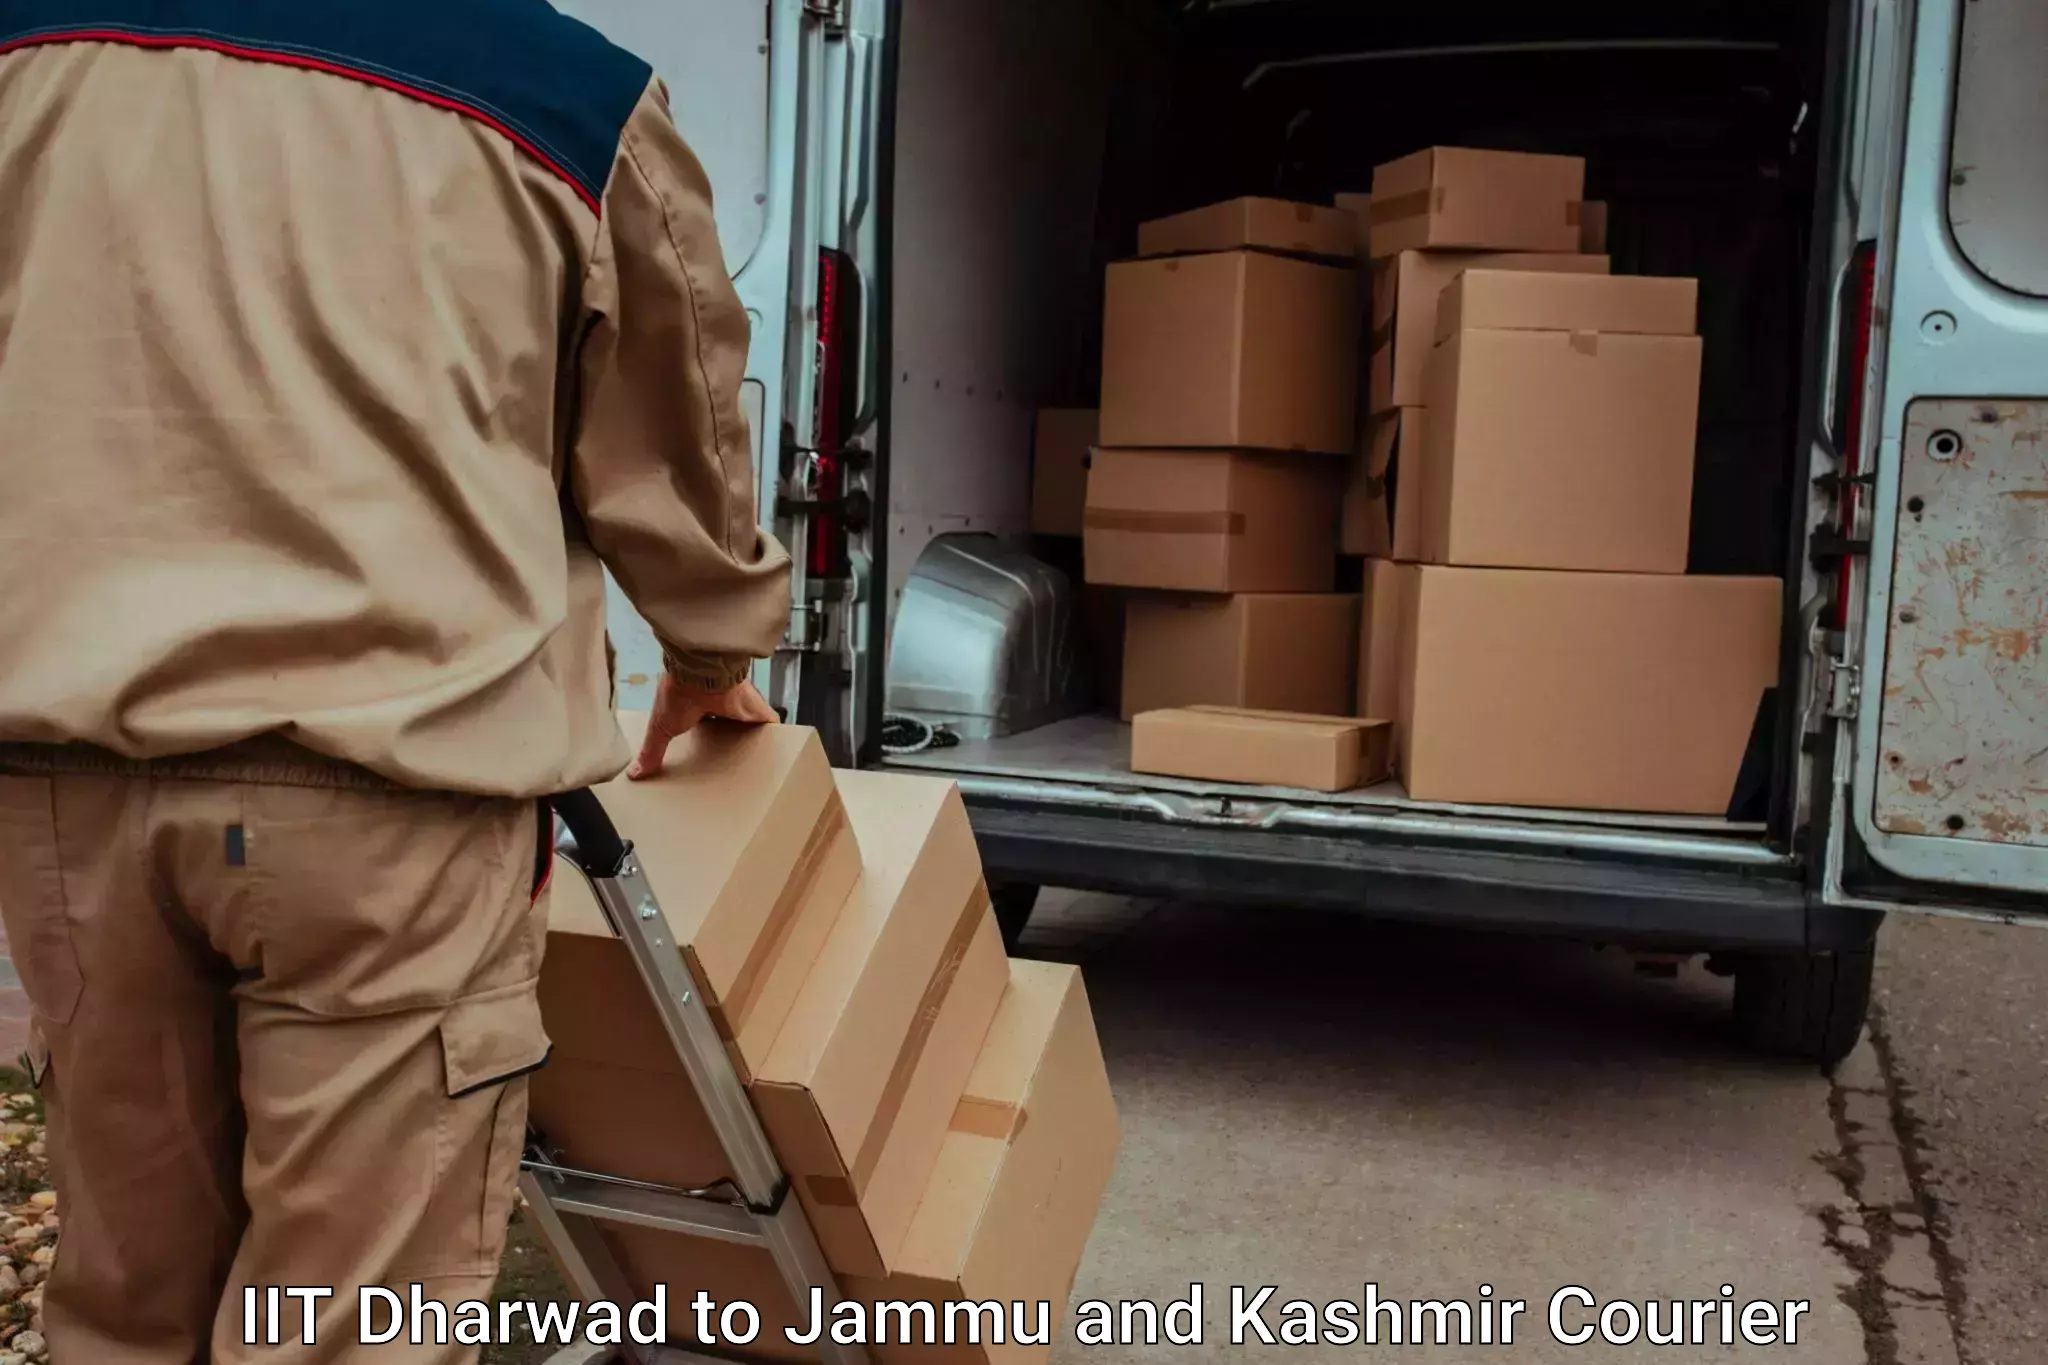 Trusted relocation experts IIT Dharwad to Jammu and Kashmir